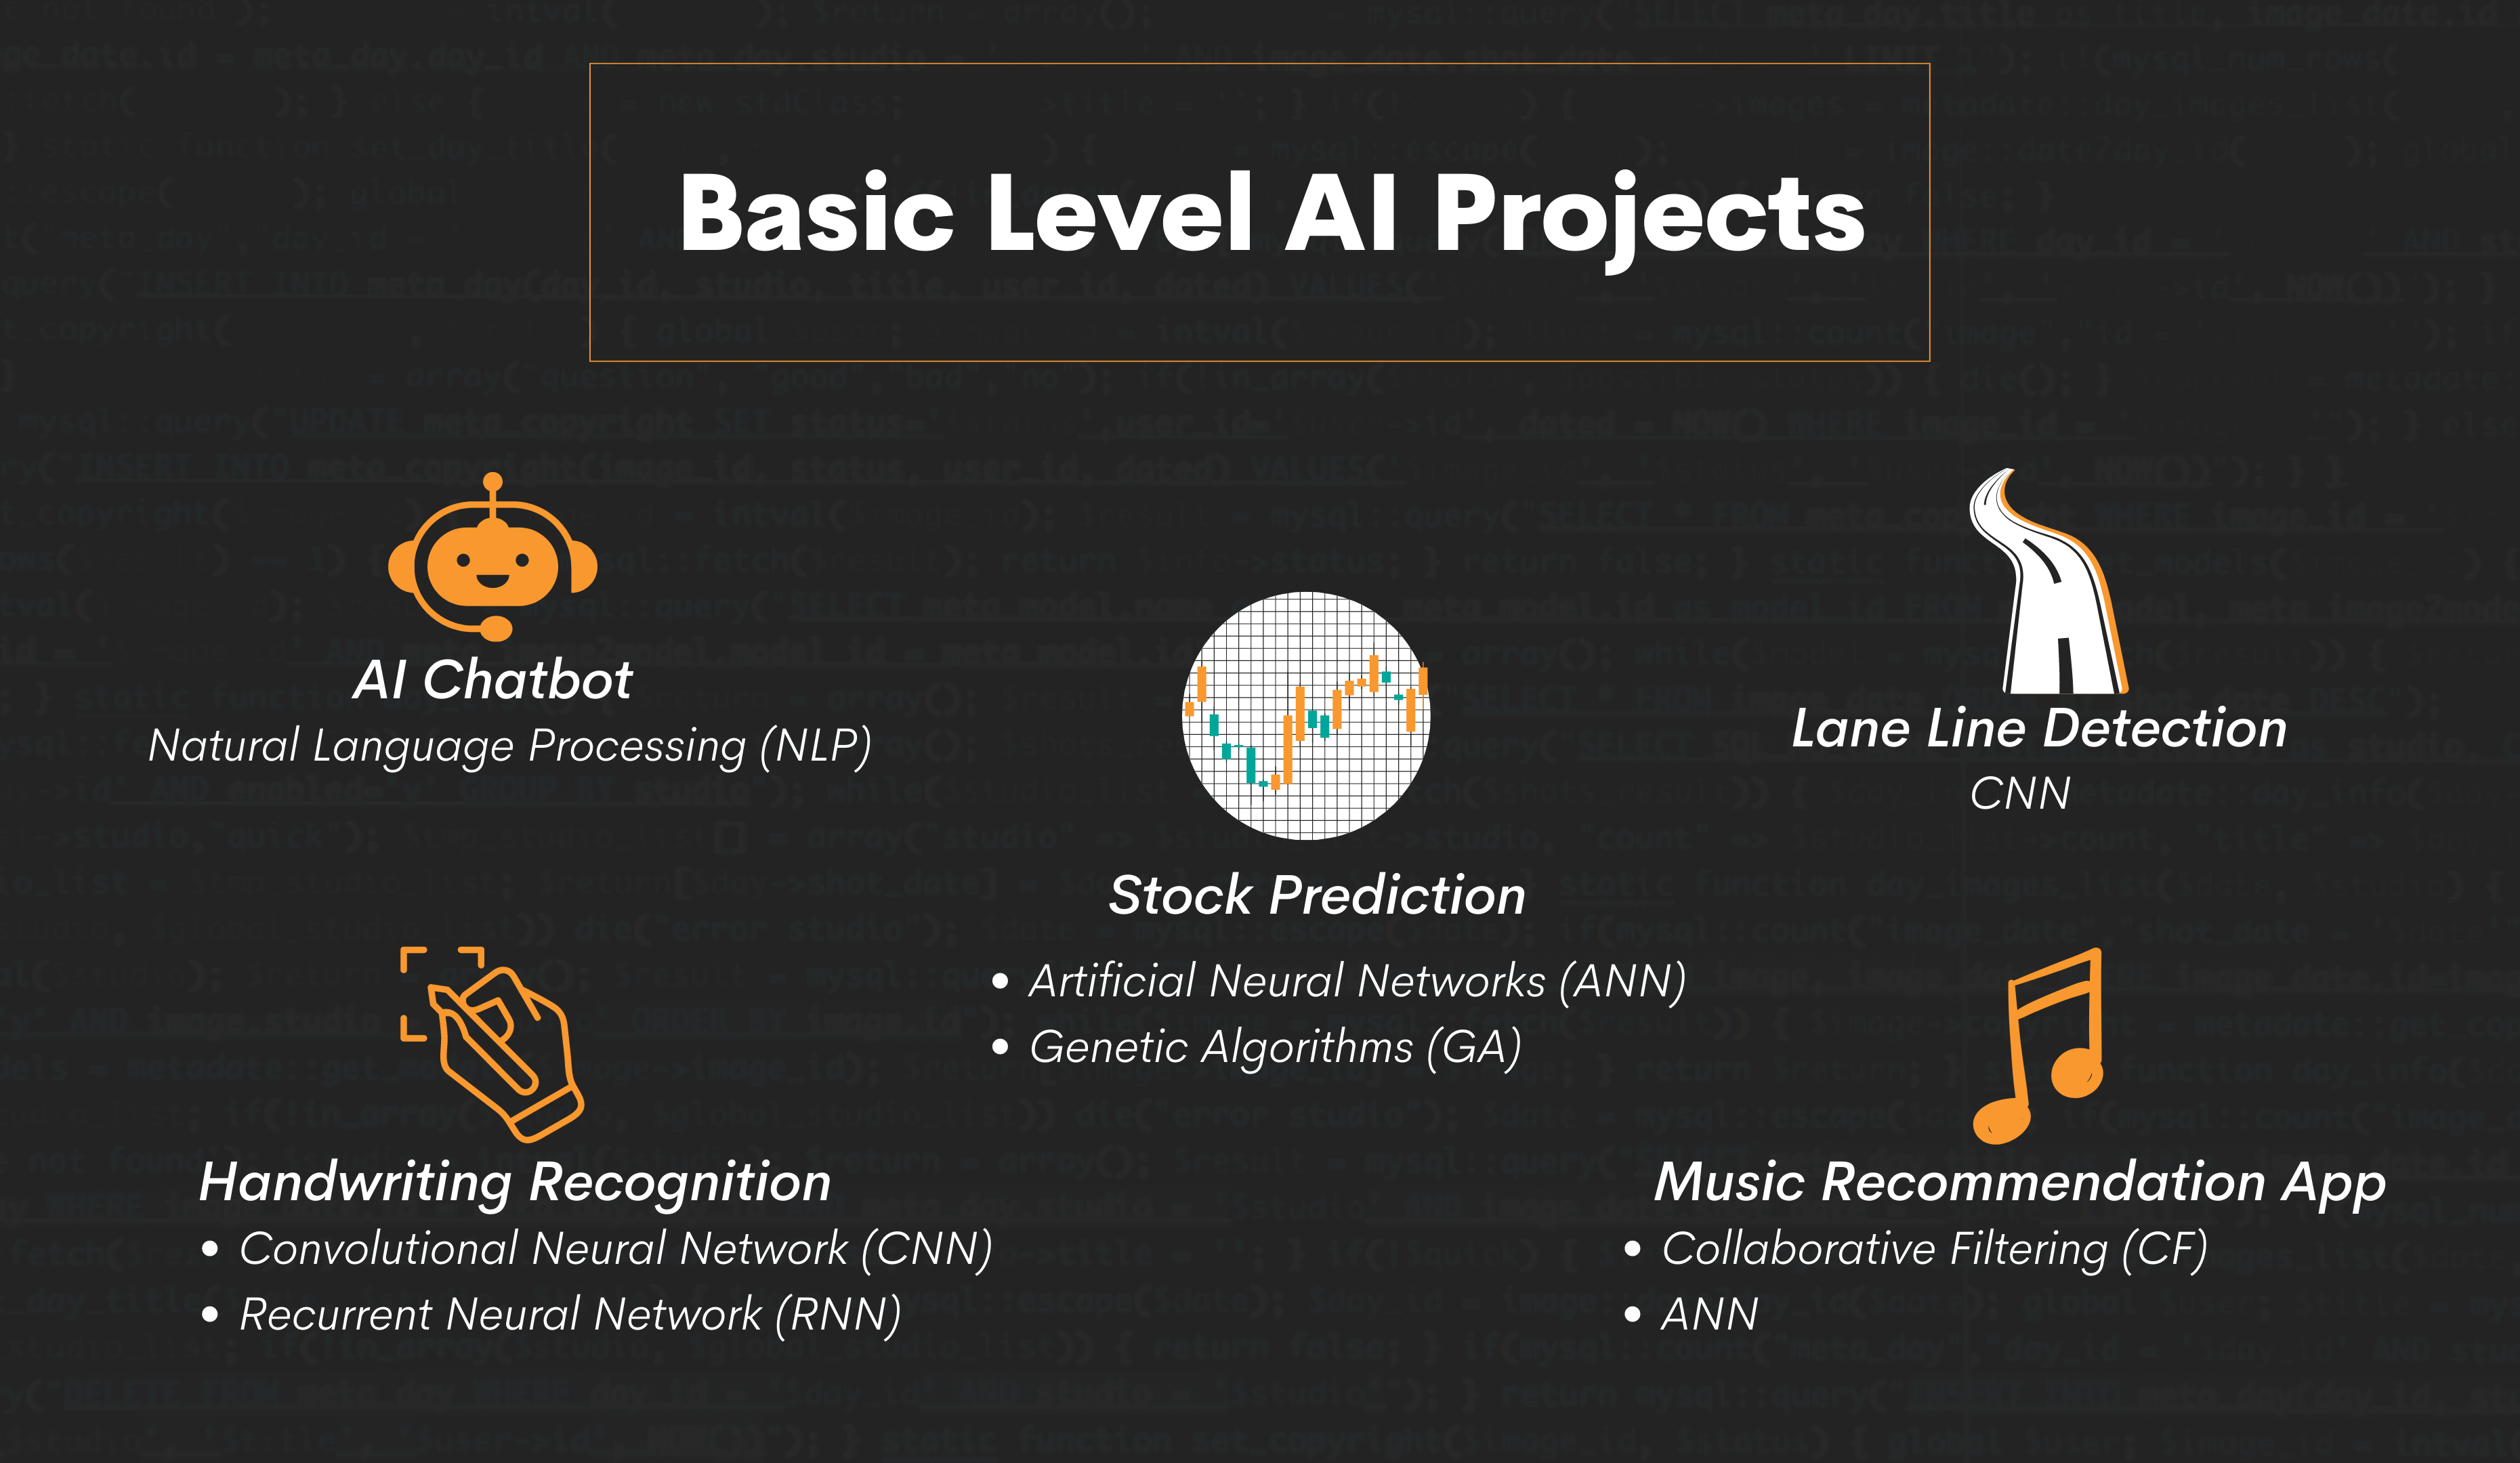 Basic Level Artificial Intelligence Project Ideas